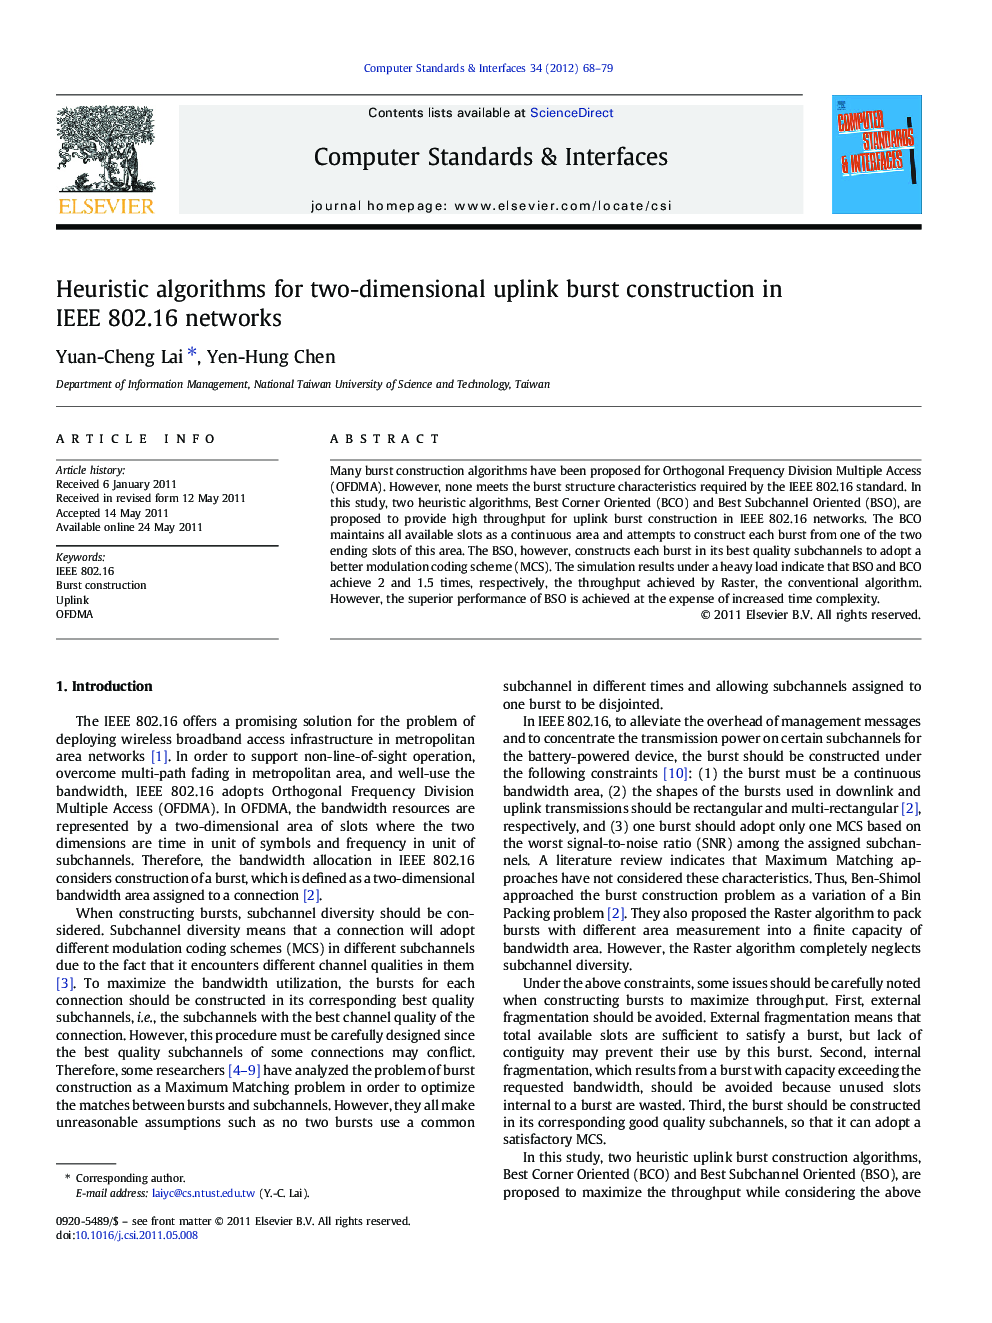 Heuristic algorithms for two-dimensional uplink burst construction in IEEE 802.16 networks